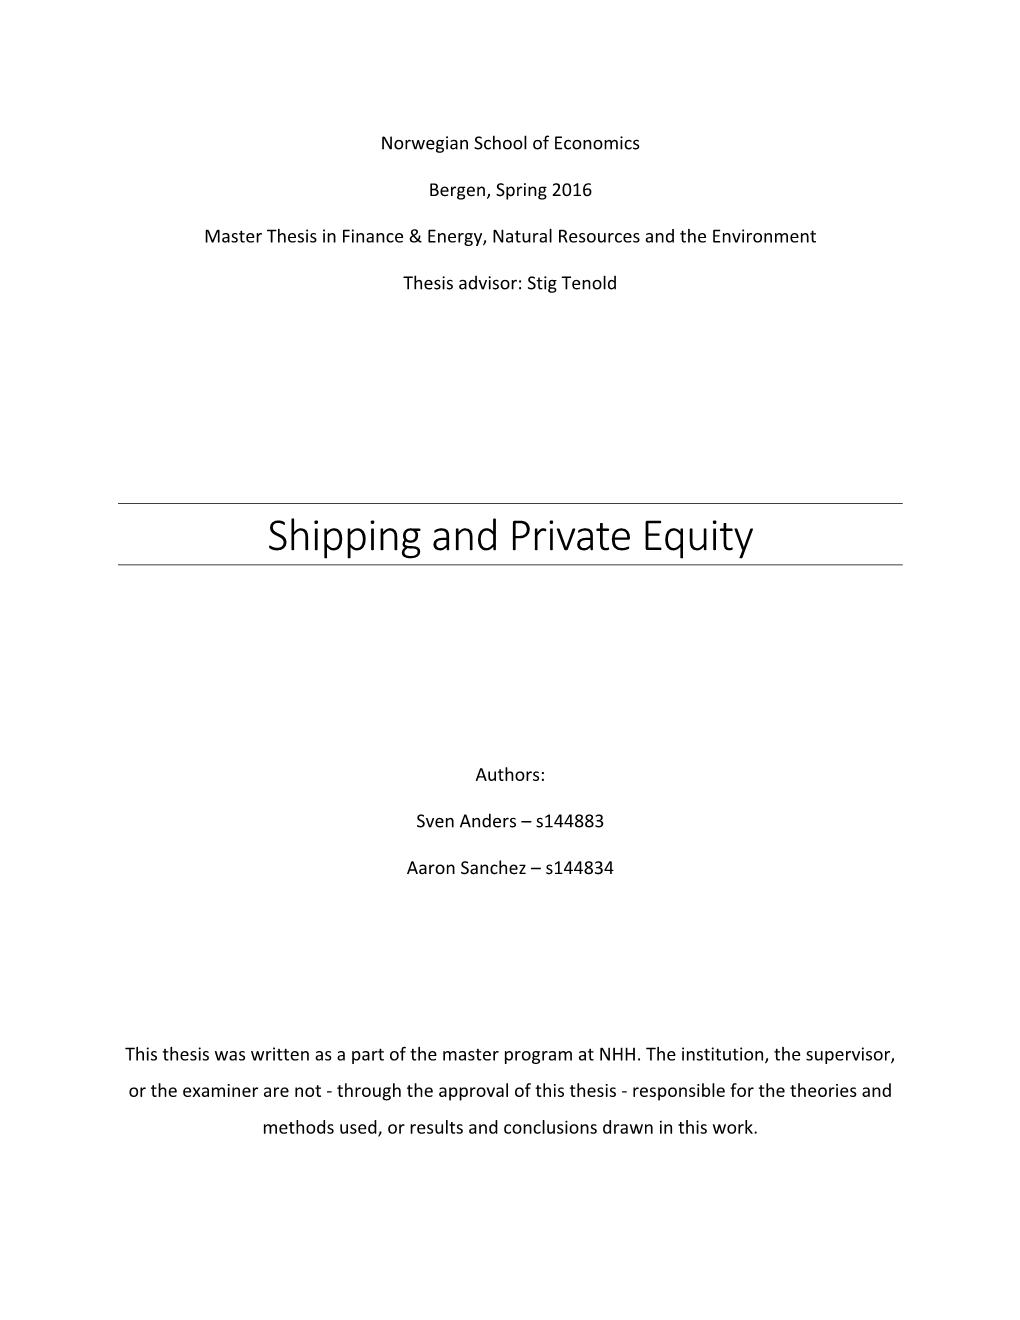 Shipping and Private Equity